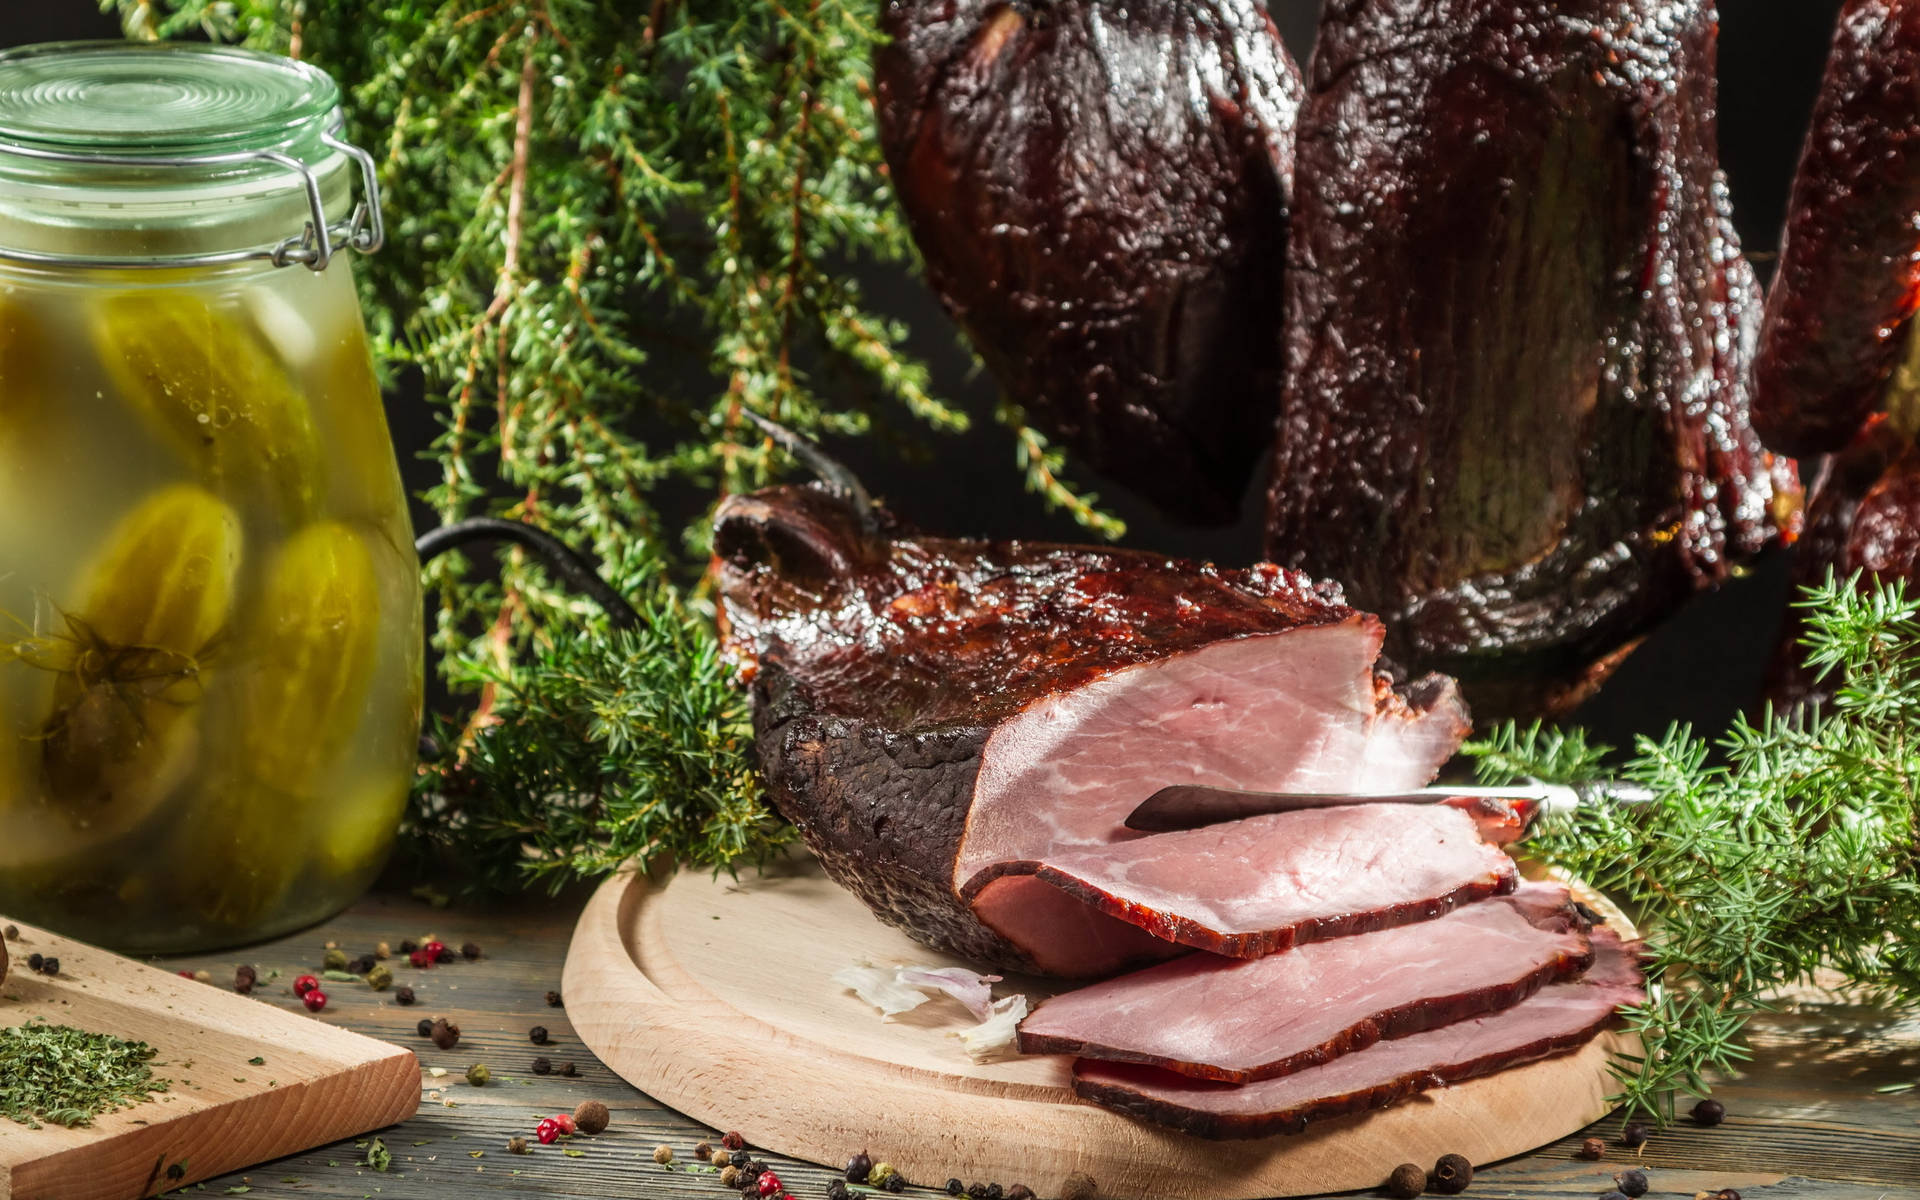 Tempting Smoked Ham - A Gastronomic Delight Background